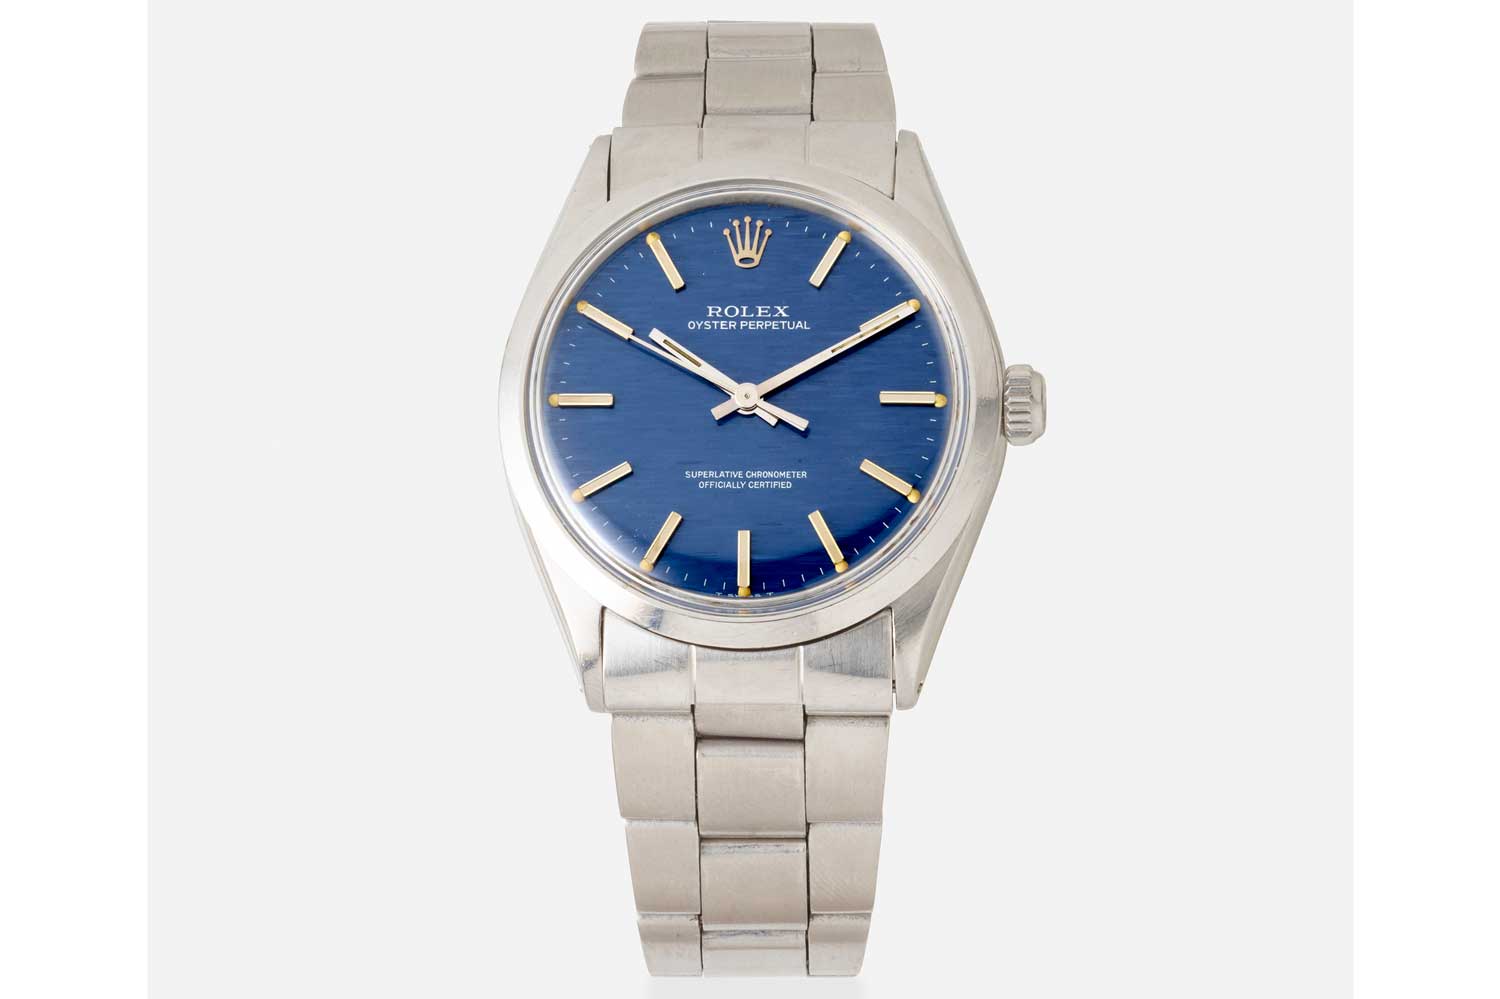 Lot 100: Eric Wind’s Rolex Oyster Perpetual ref. 1002 with ‘Mosaic Shantung’ dial